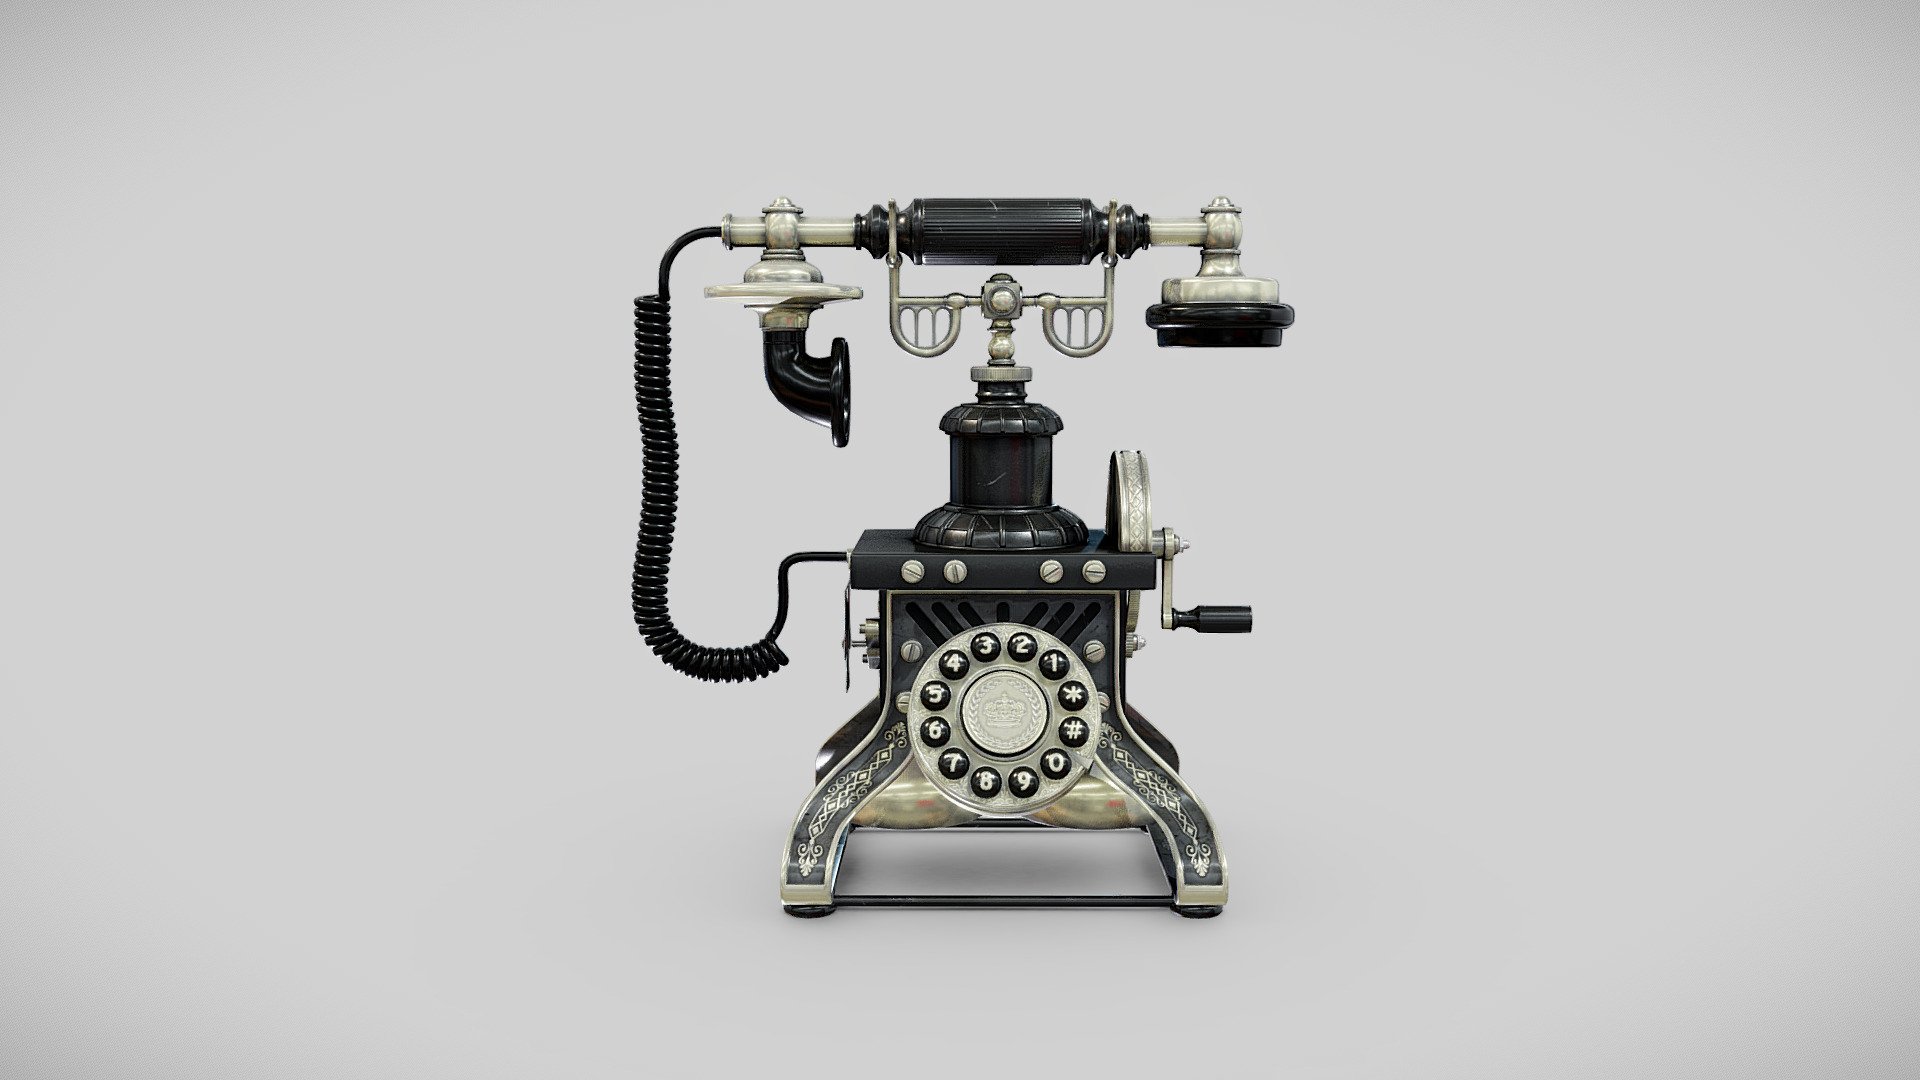 3d photorealistic model of an antique phone Eiffel Tower 1892 with an original vintage Retro style and ornamented.

Entirely modeled with 3d studio max and rendered This model contains 61547 polygons




All Textures 4k PBR (specular/gloss and roughness/metalness)

4 variants textures

Available Formats




MAX (3d Studio Max 2017)

FBX (Multi Format)

3ds

OBJ (Multi Format)
 - Eiffel Tower 1892 Reproduction Telephone - Buy Royalty Free 3D model by Enaphets 3d model